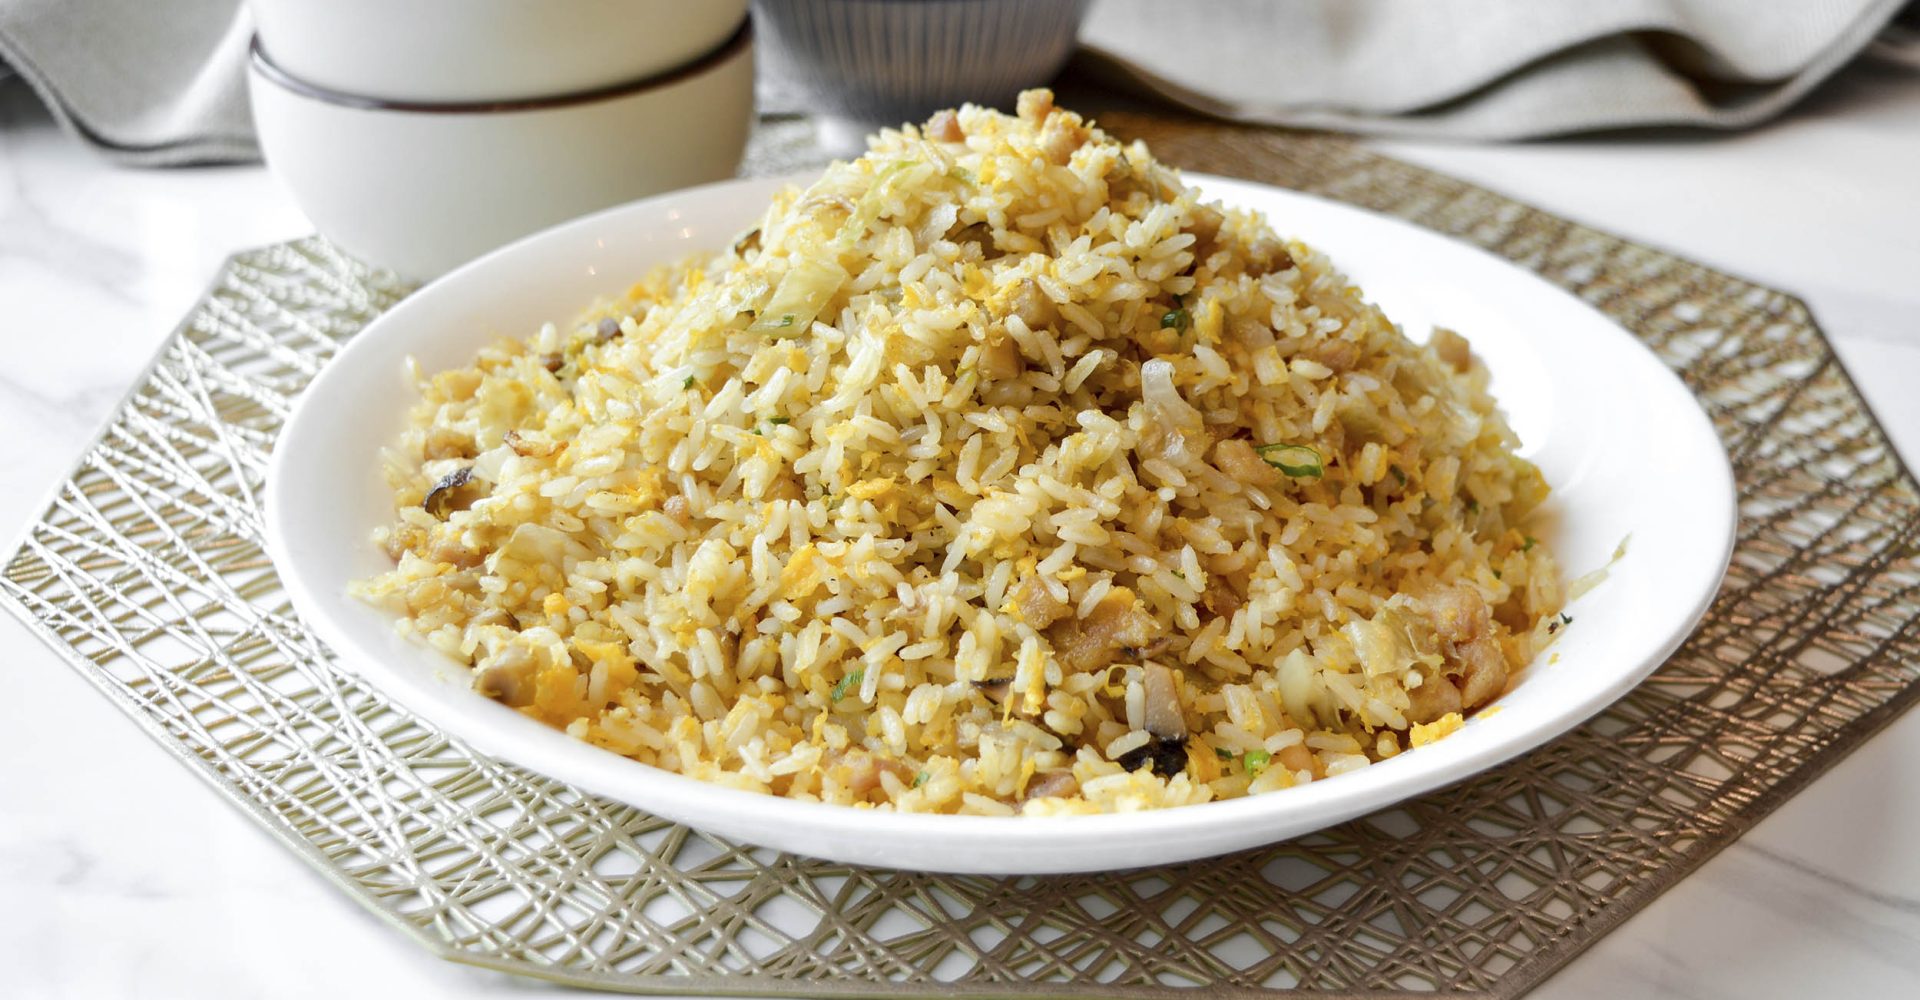 Salty fish fried rice